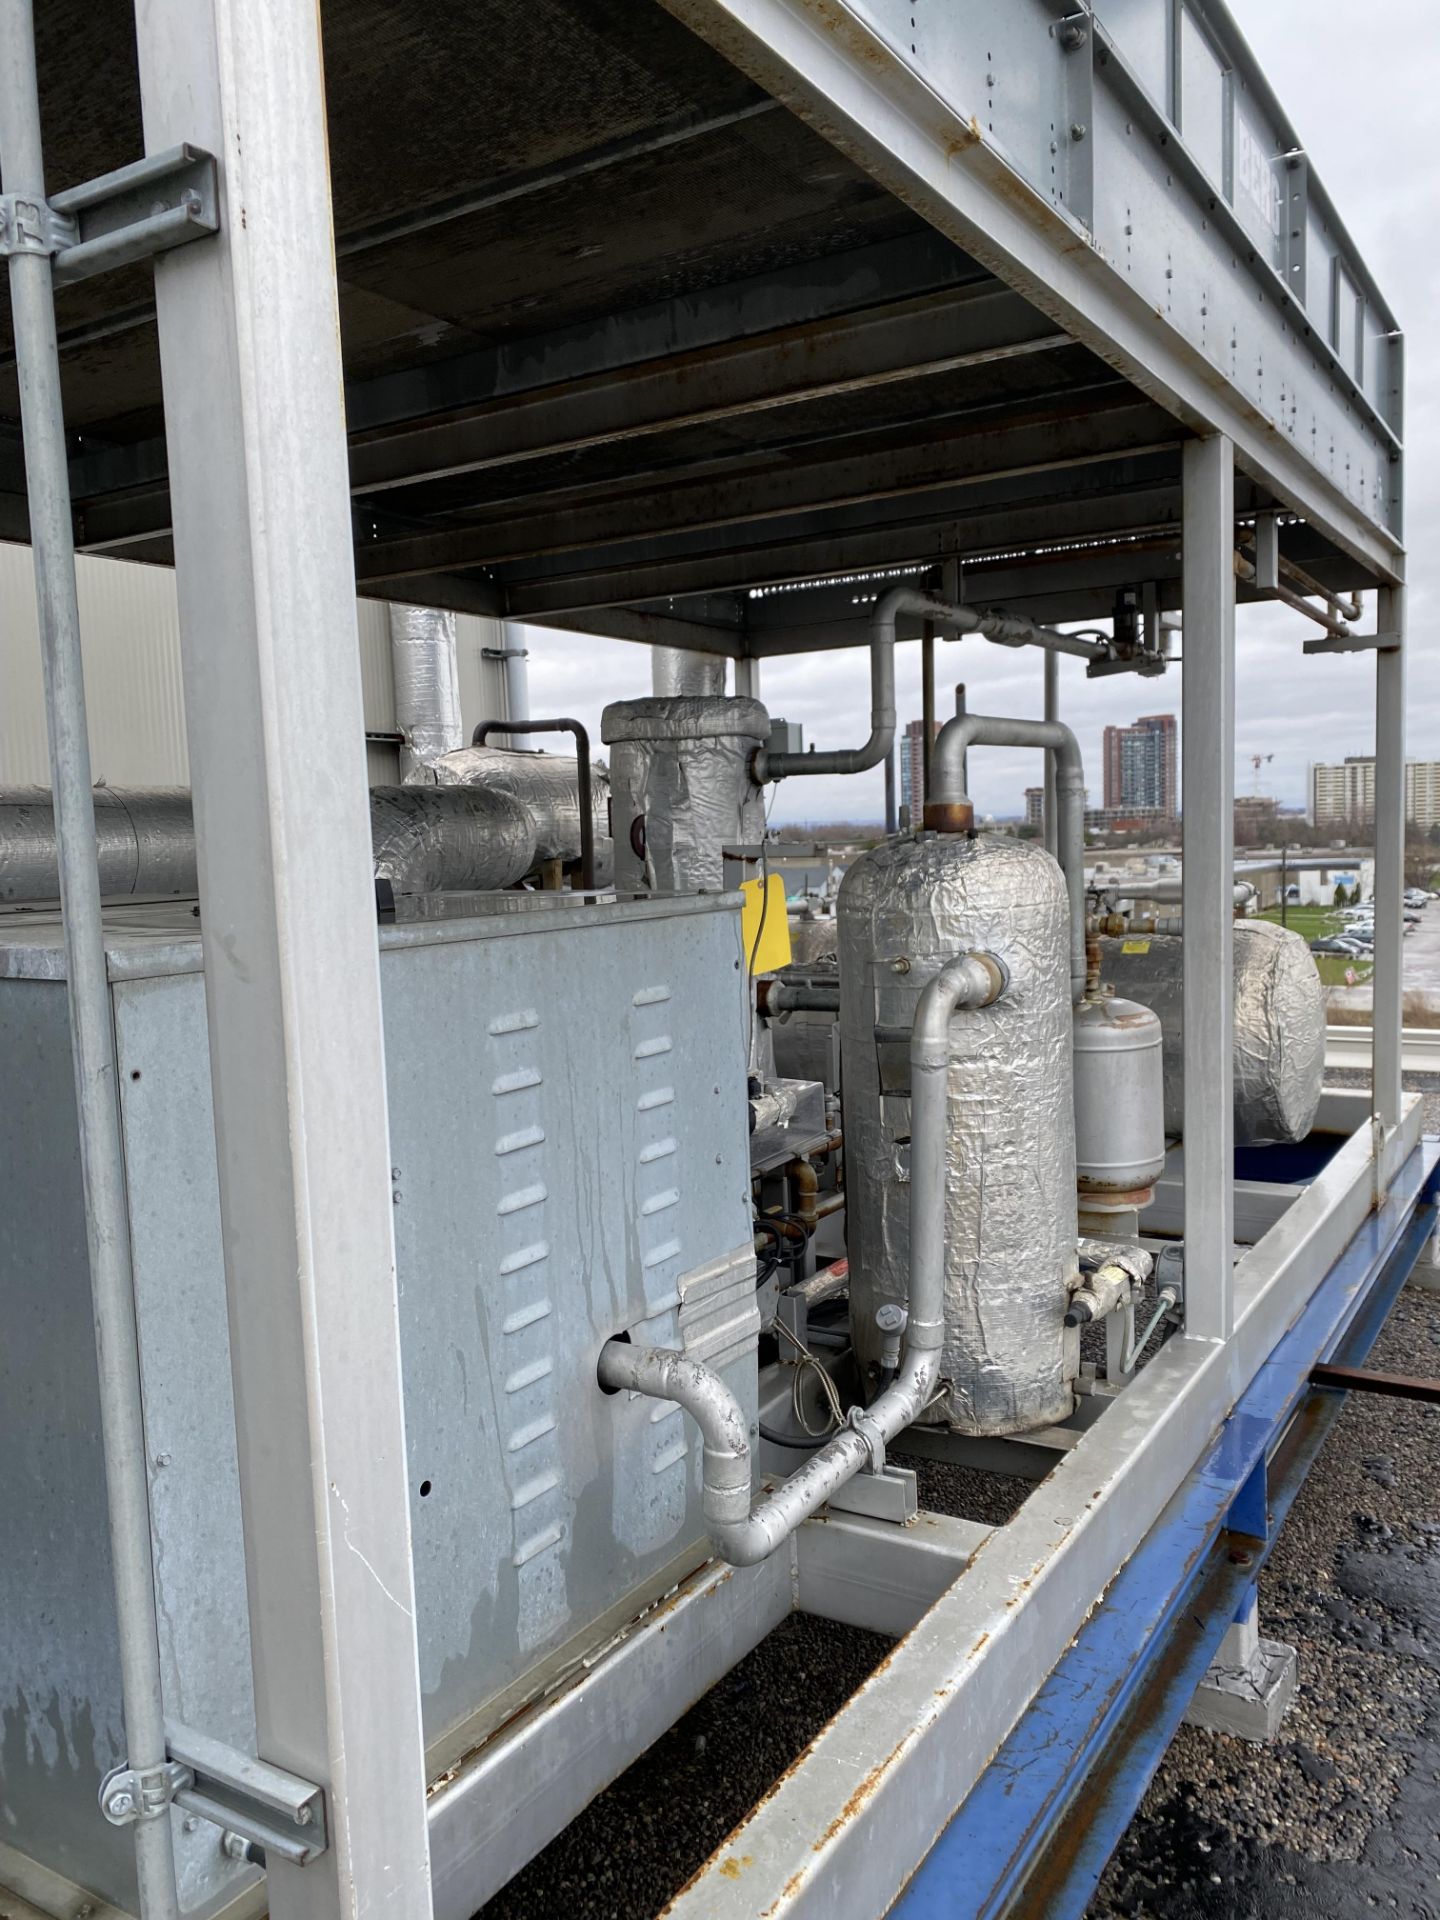 BERG APQ-125-1/0 OUTDOOR AIR COOLED SKID MOUNTED CHILLER, 125HP, S/N S03440A-AJ1-0319 (ON ROOF) ( - Image 6 of 7